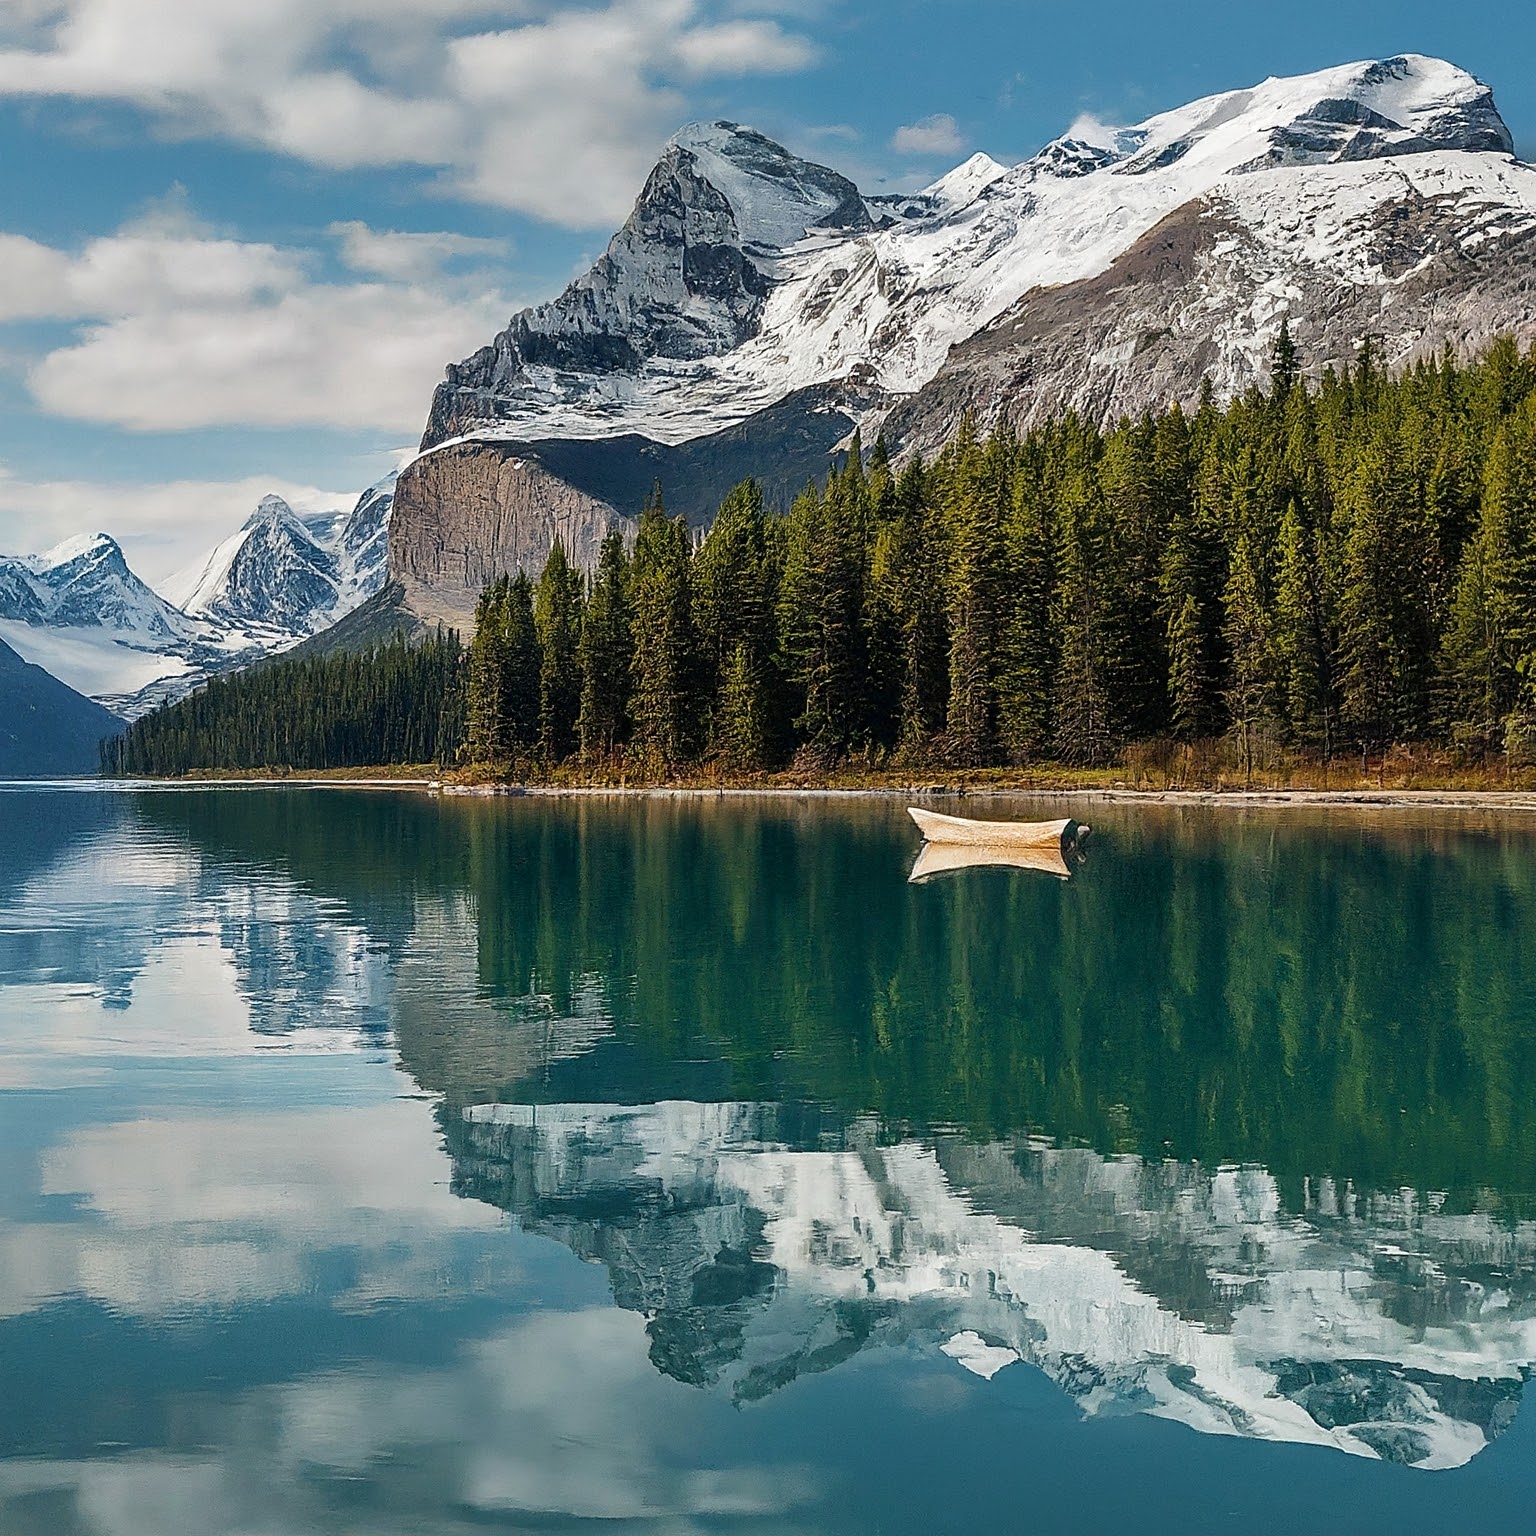 Maligne Lake in Jasper National Parks in Canada, with snow-capped mountains, evergreen forest, and a boat.